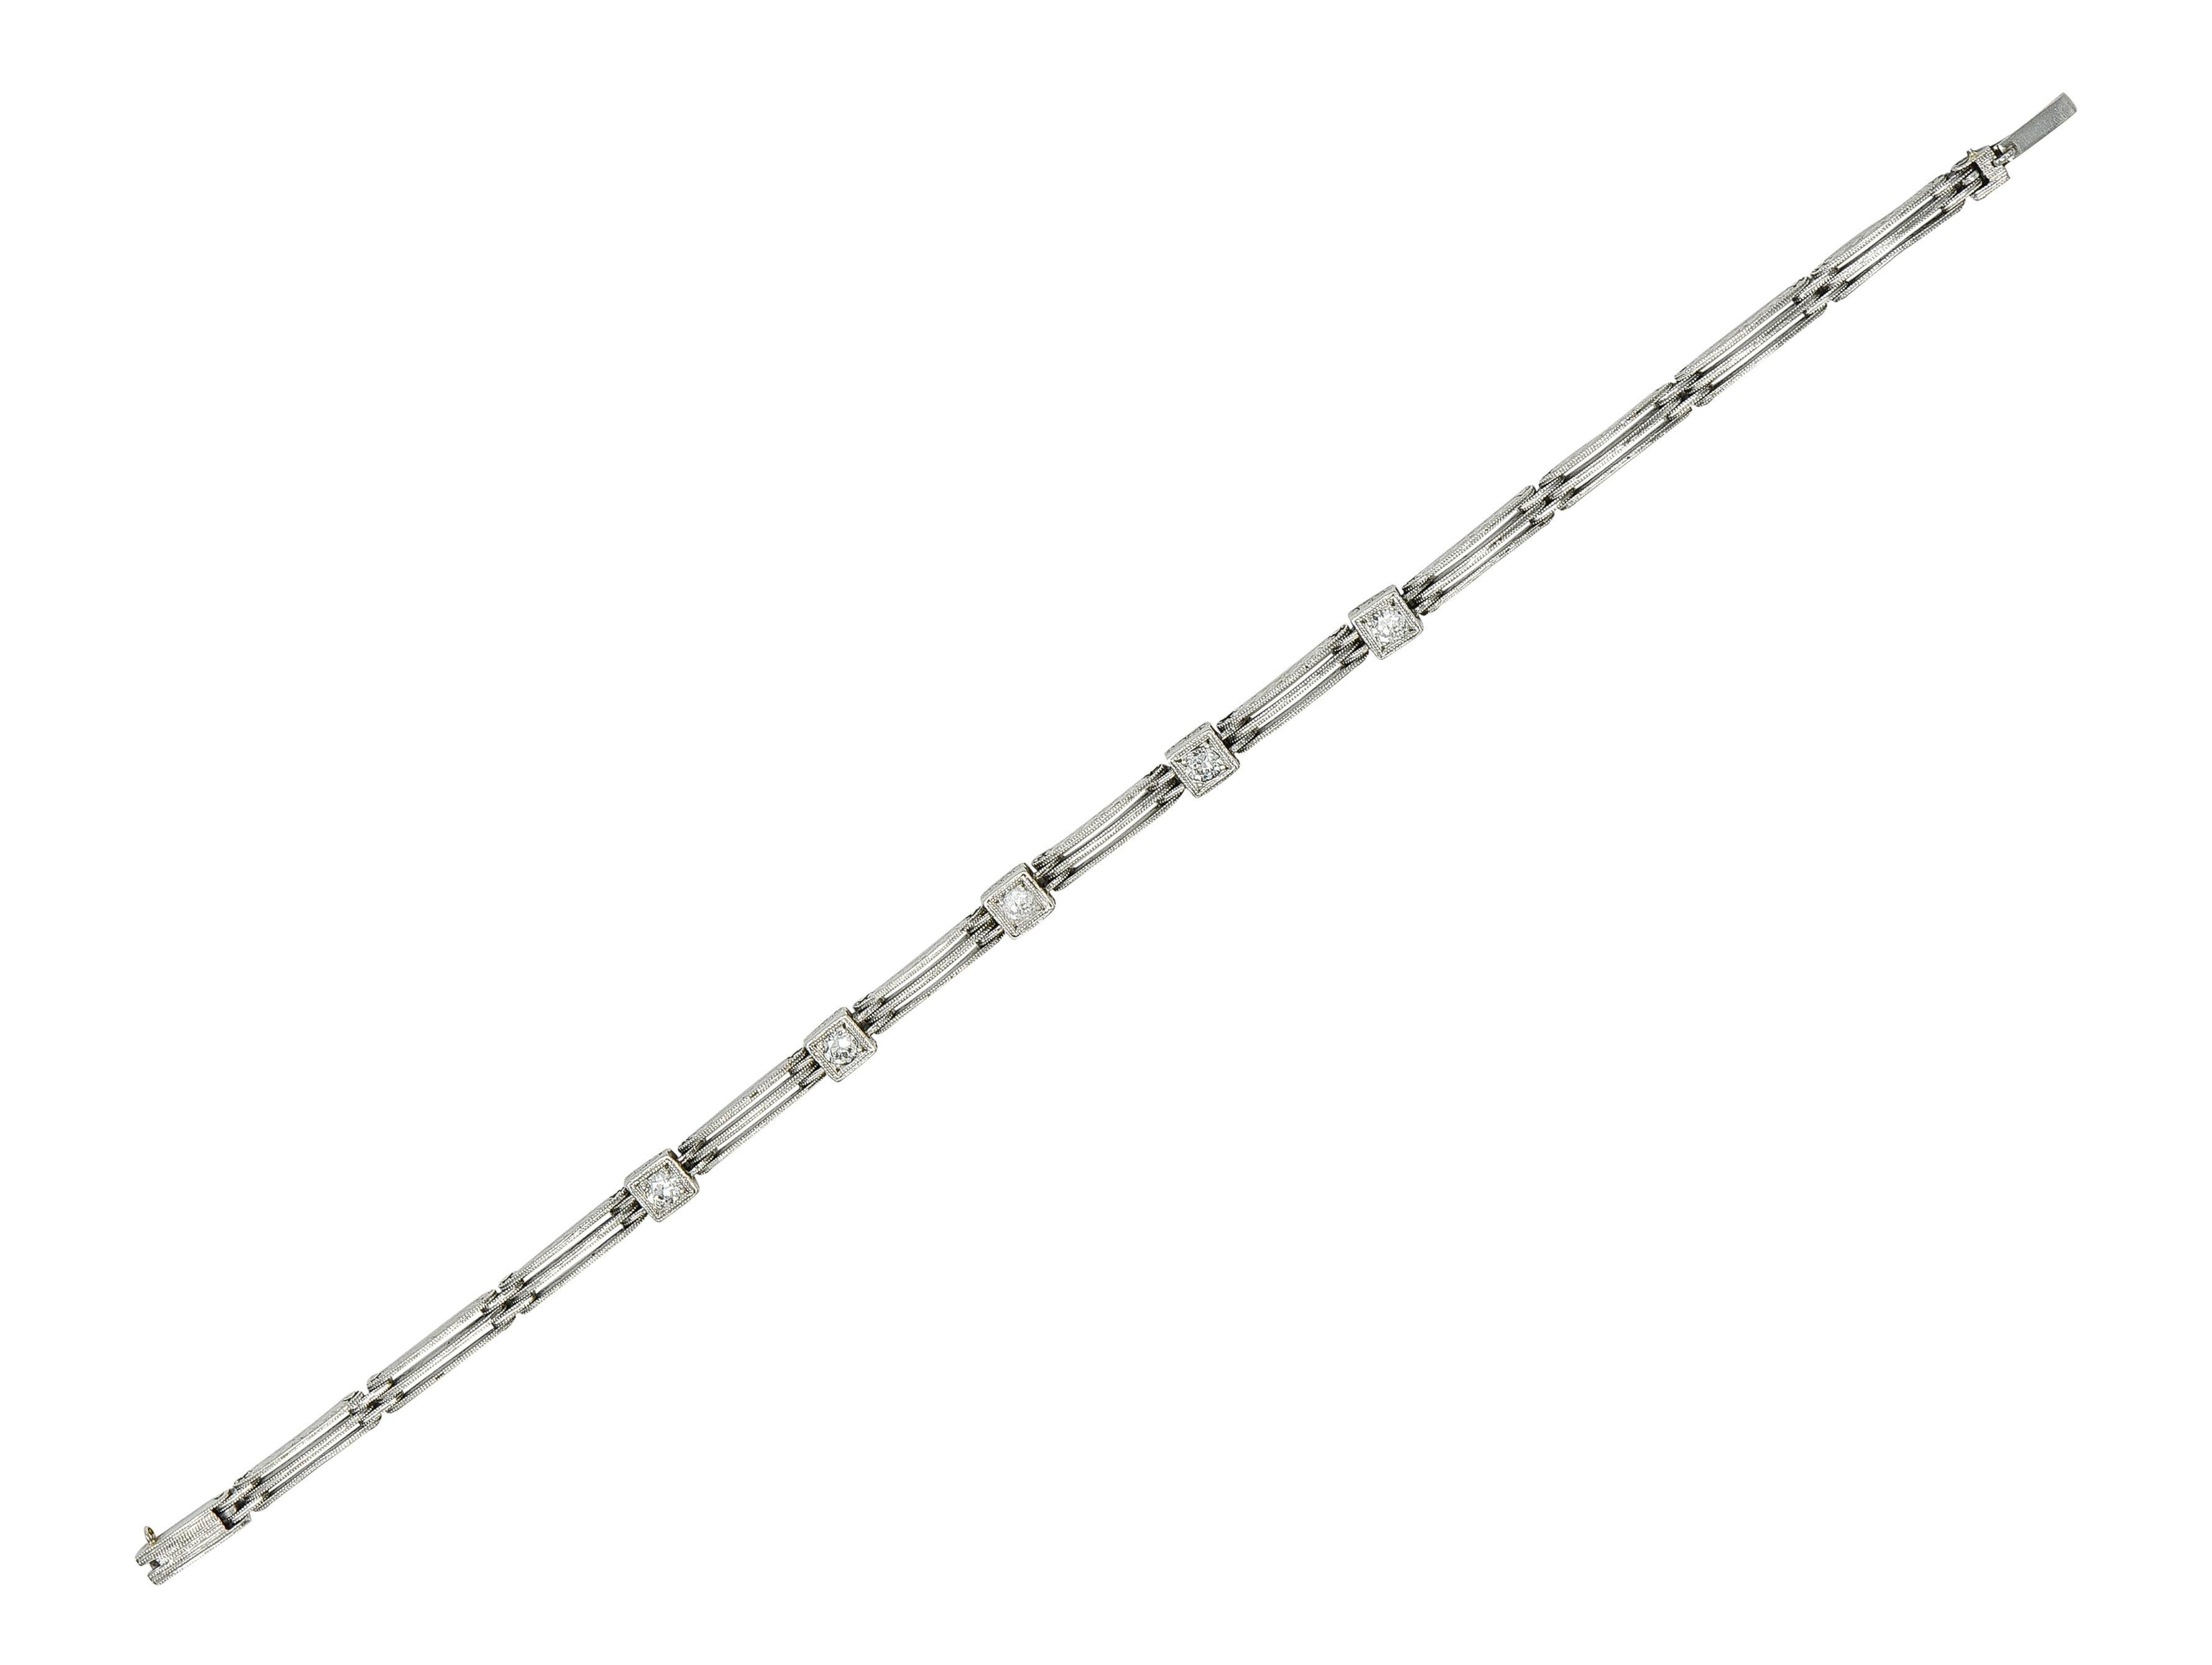 Comprised of hinged tri-split bar link with box link stations
Each centering a bead set transitional cut diamonds 
Weighing approximately 0.50 carat total - G/H color with VS2 clarity
Accented by wheat motif engraved profiles
Topped with milgrain